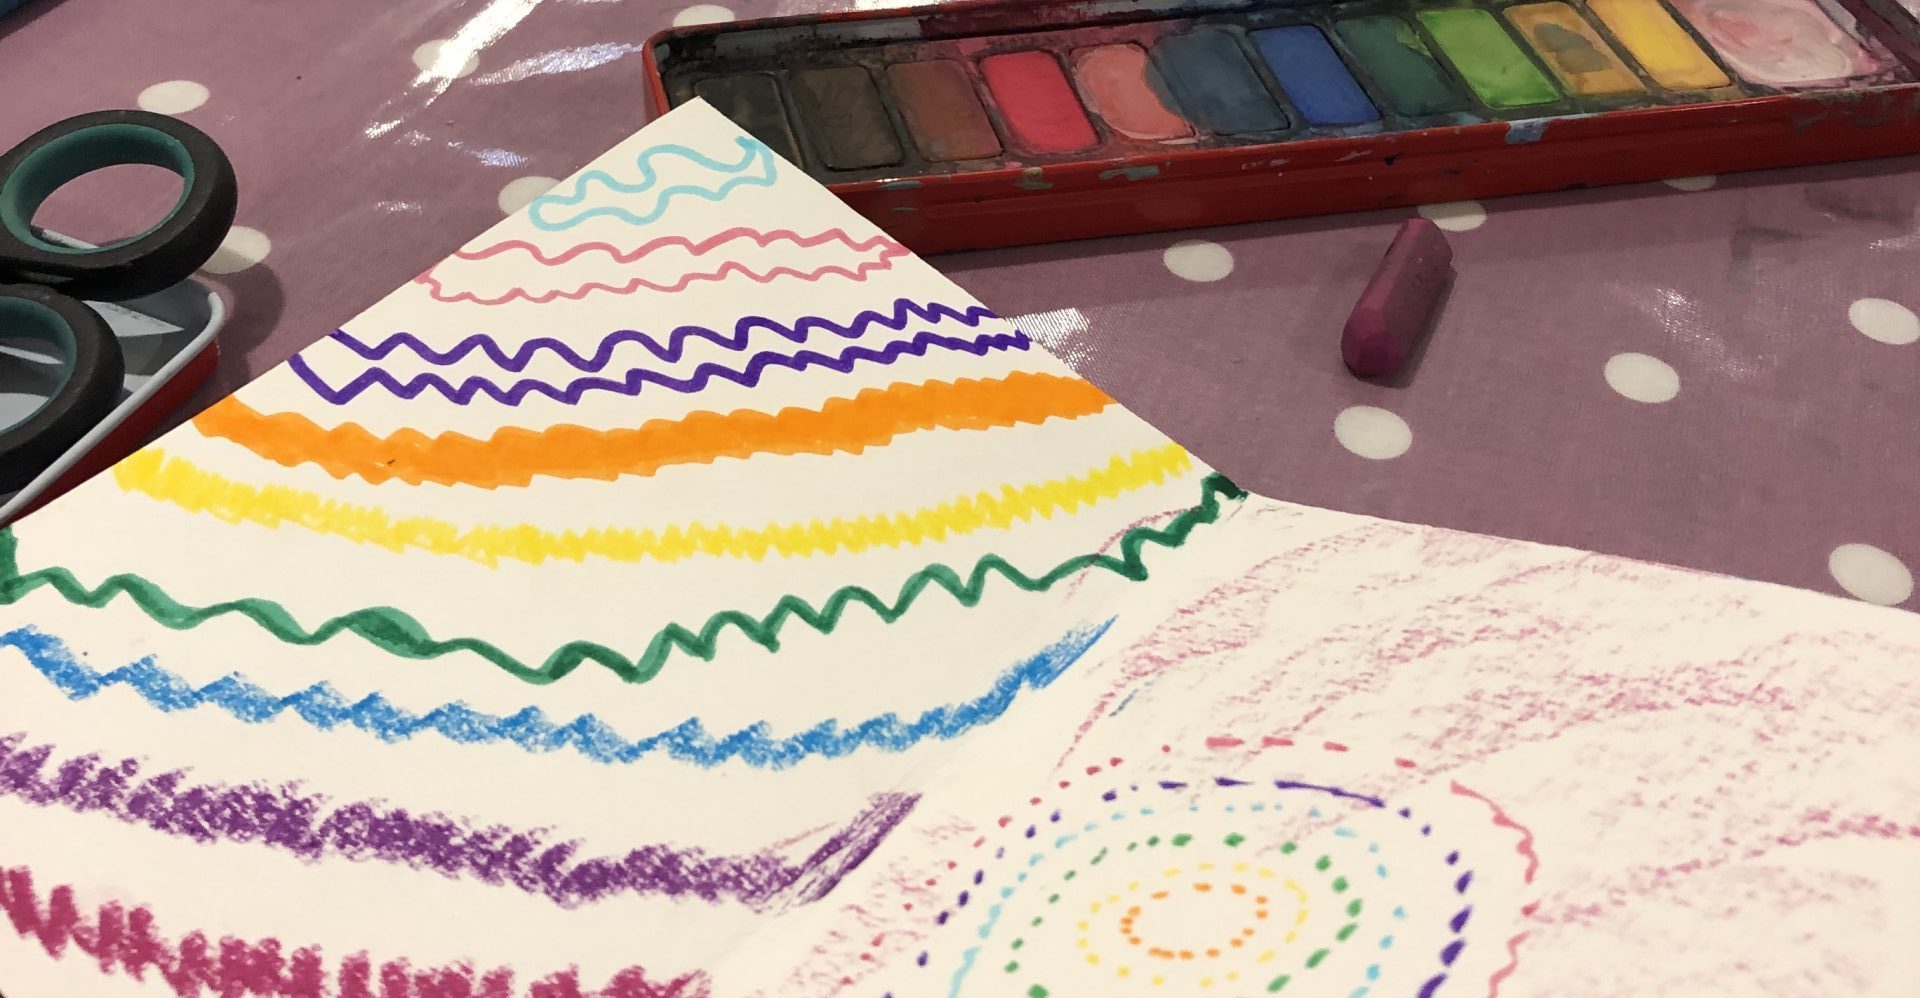 A zine (a paper booklet) decorated with colourful oil pastel patterns sits in the foreground. In the background art materials including a watercolour tablet and a pair of scissors can be seen.